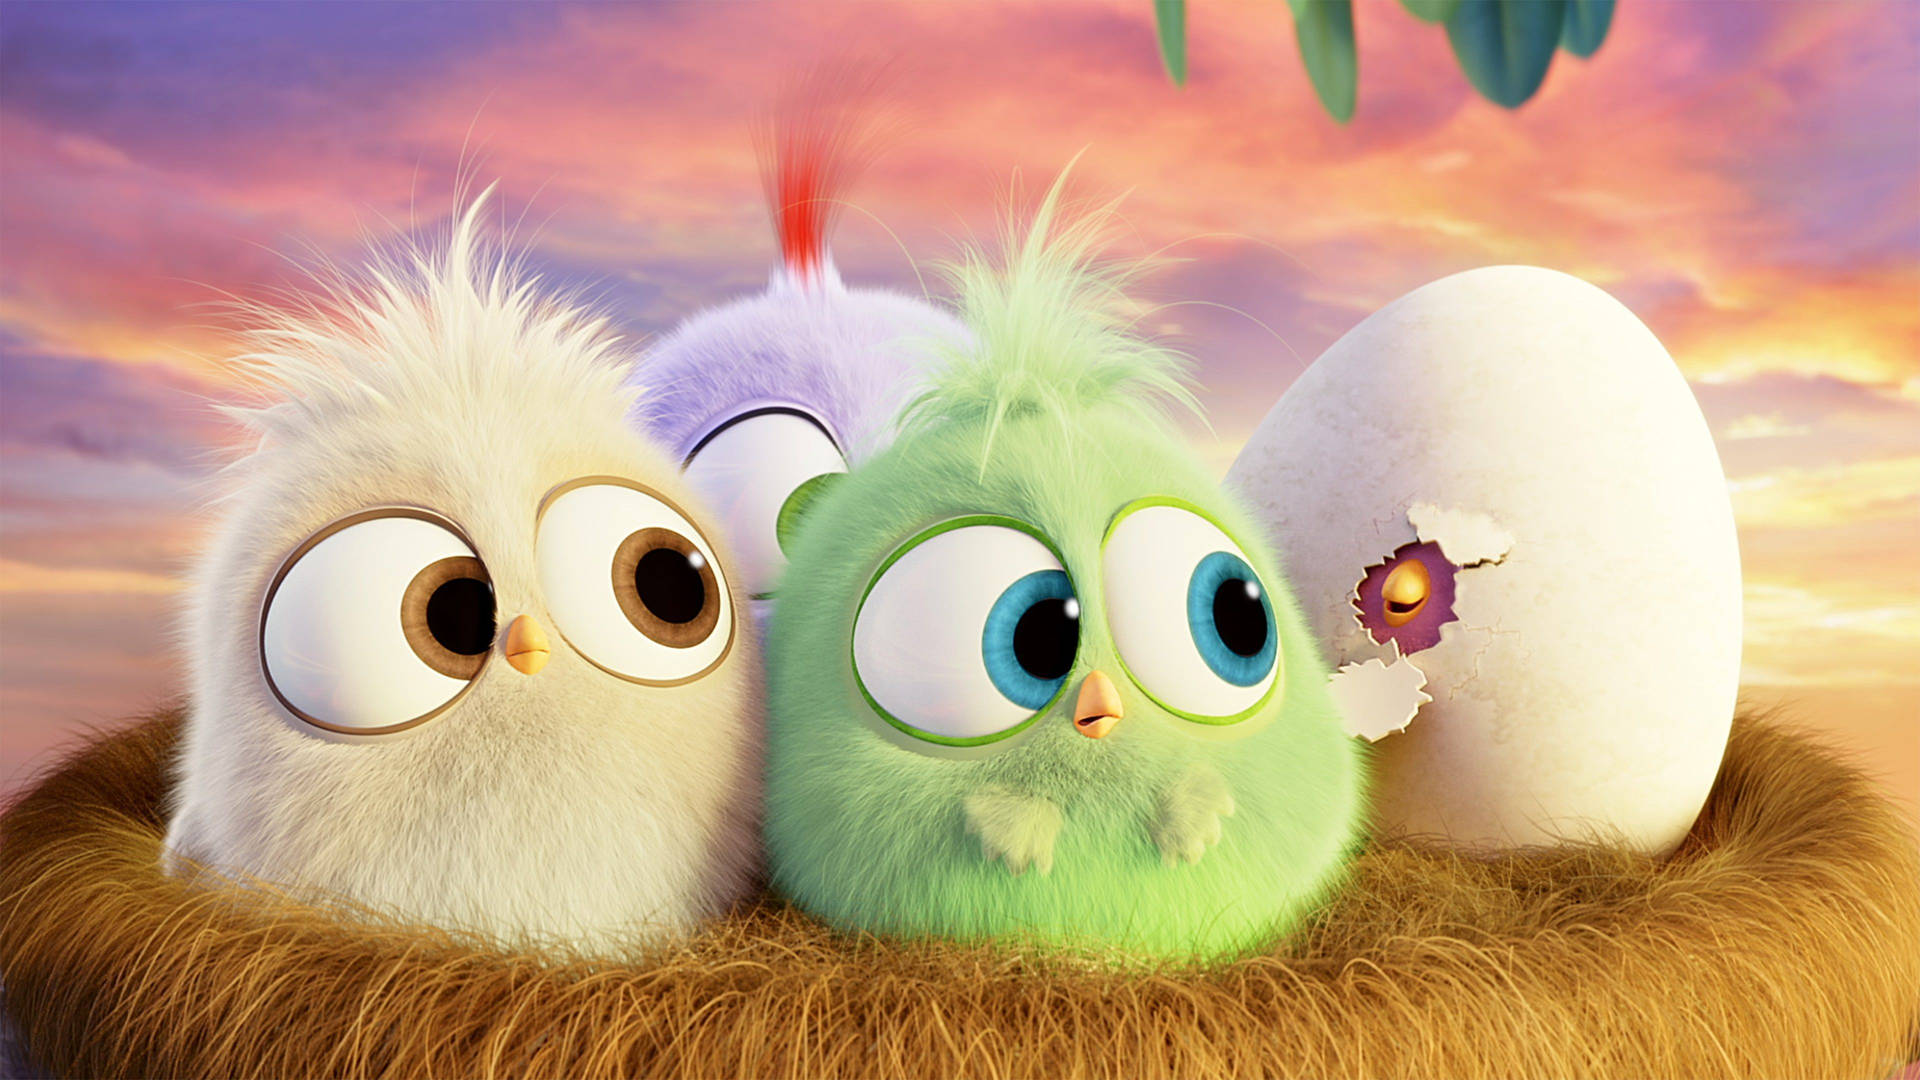 The Angry Birds Movie 2 Adorable Chicks Wallpaper